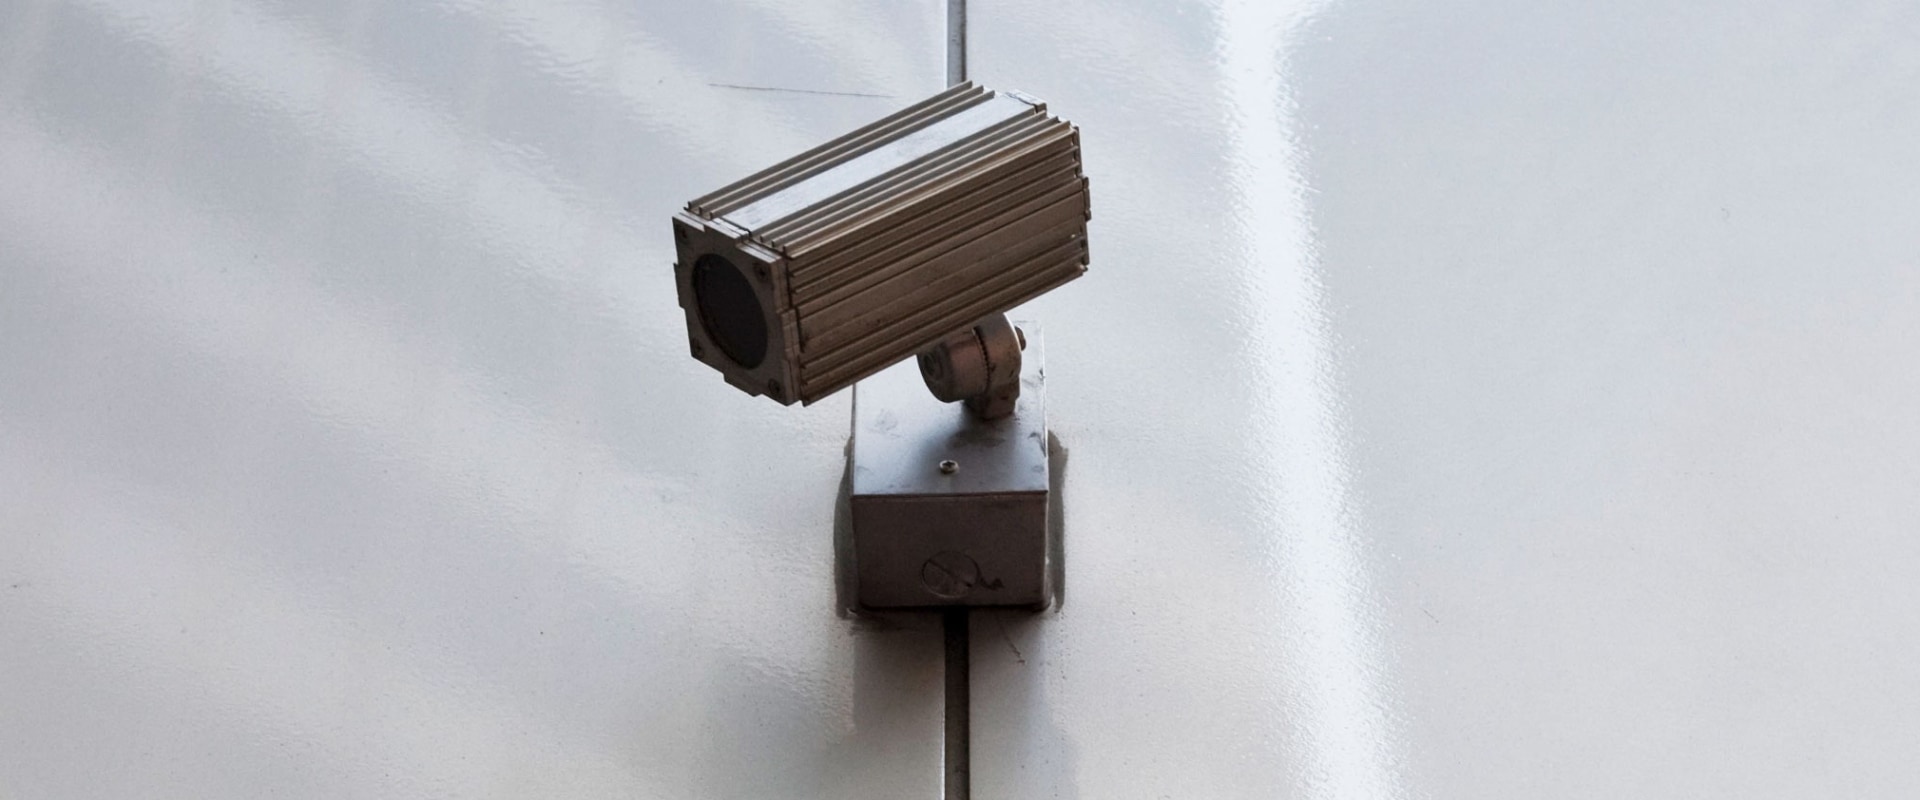 Understanding Easy Setup and Installation Processes for Surveillance Cams